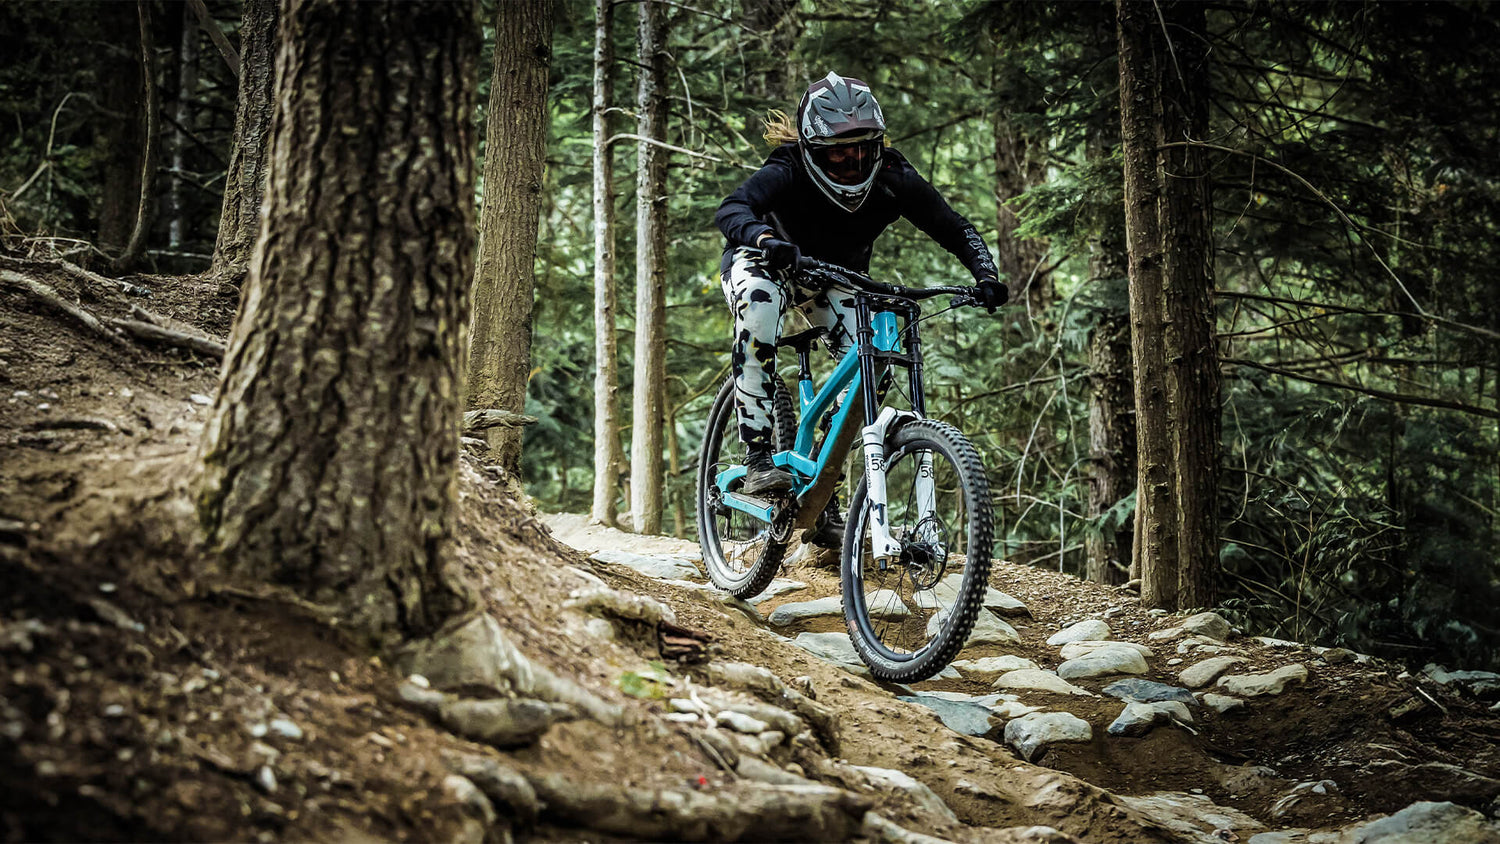 Woman Mountain bike rider wearing the Luxe gear in the forest